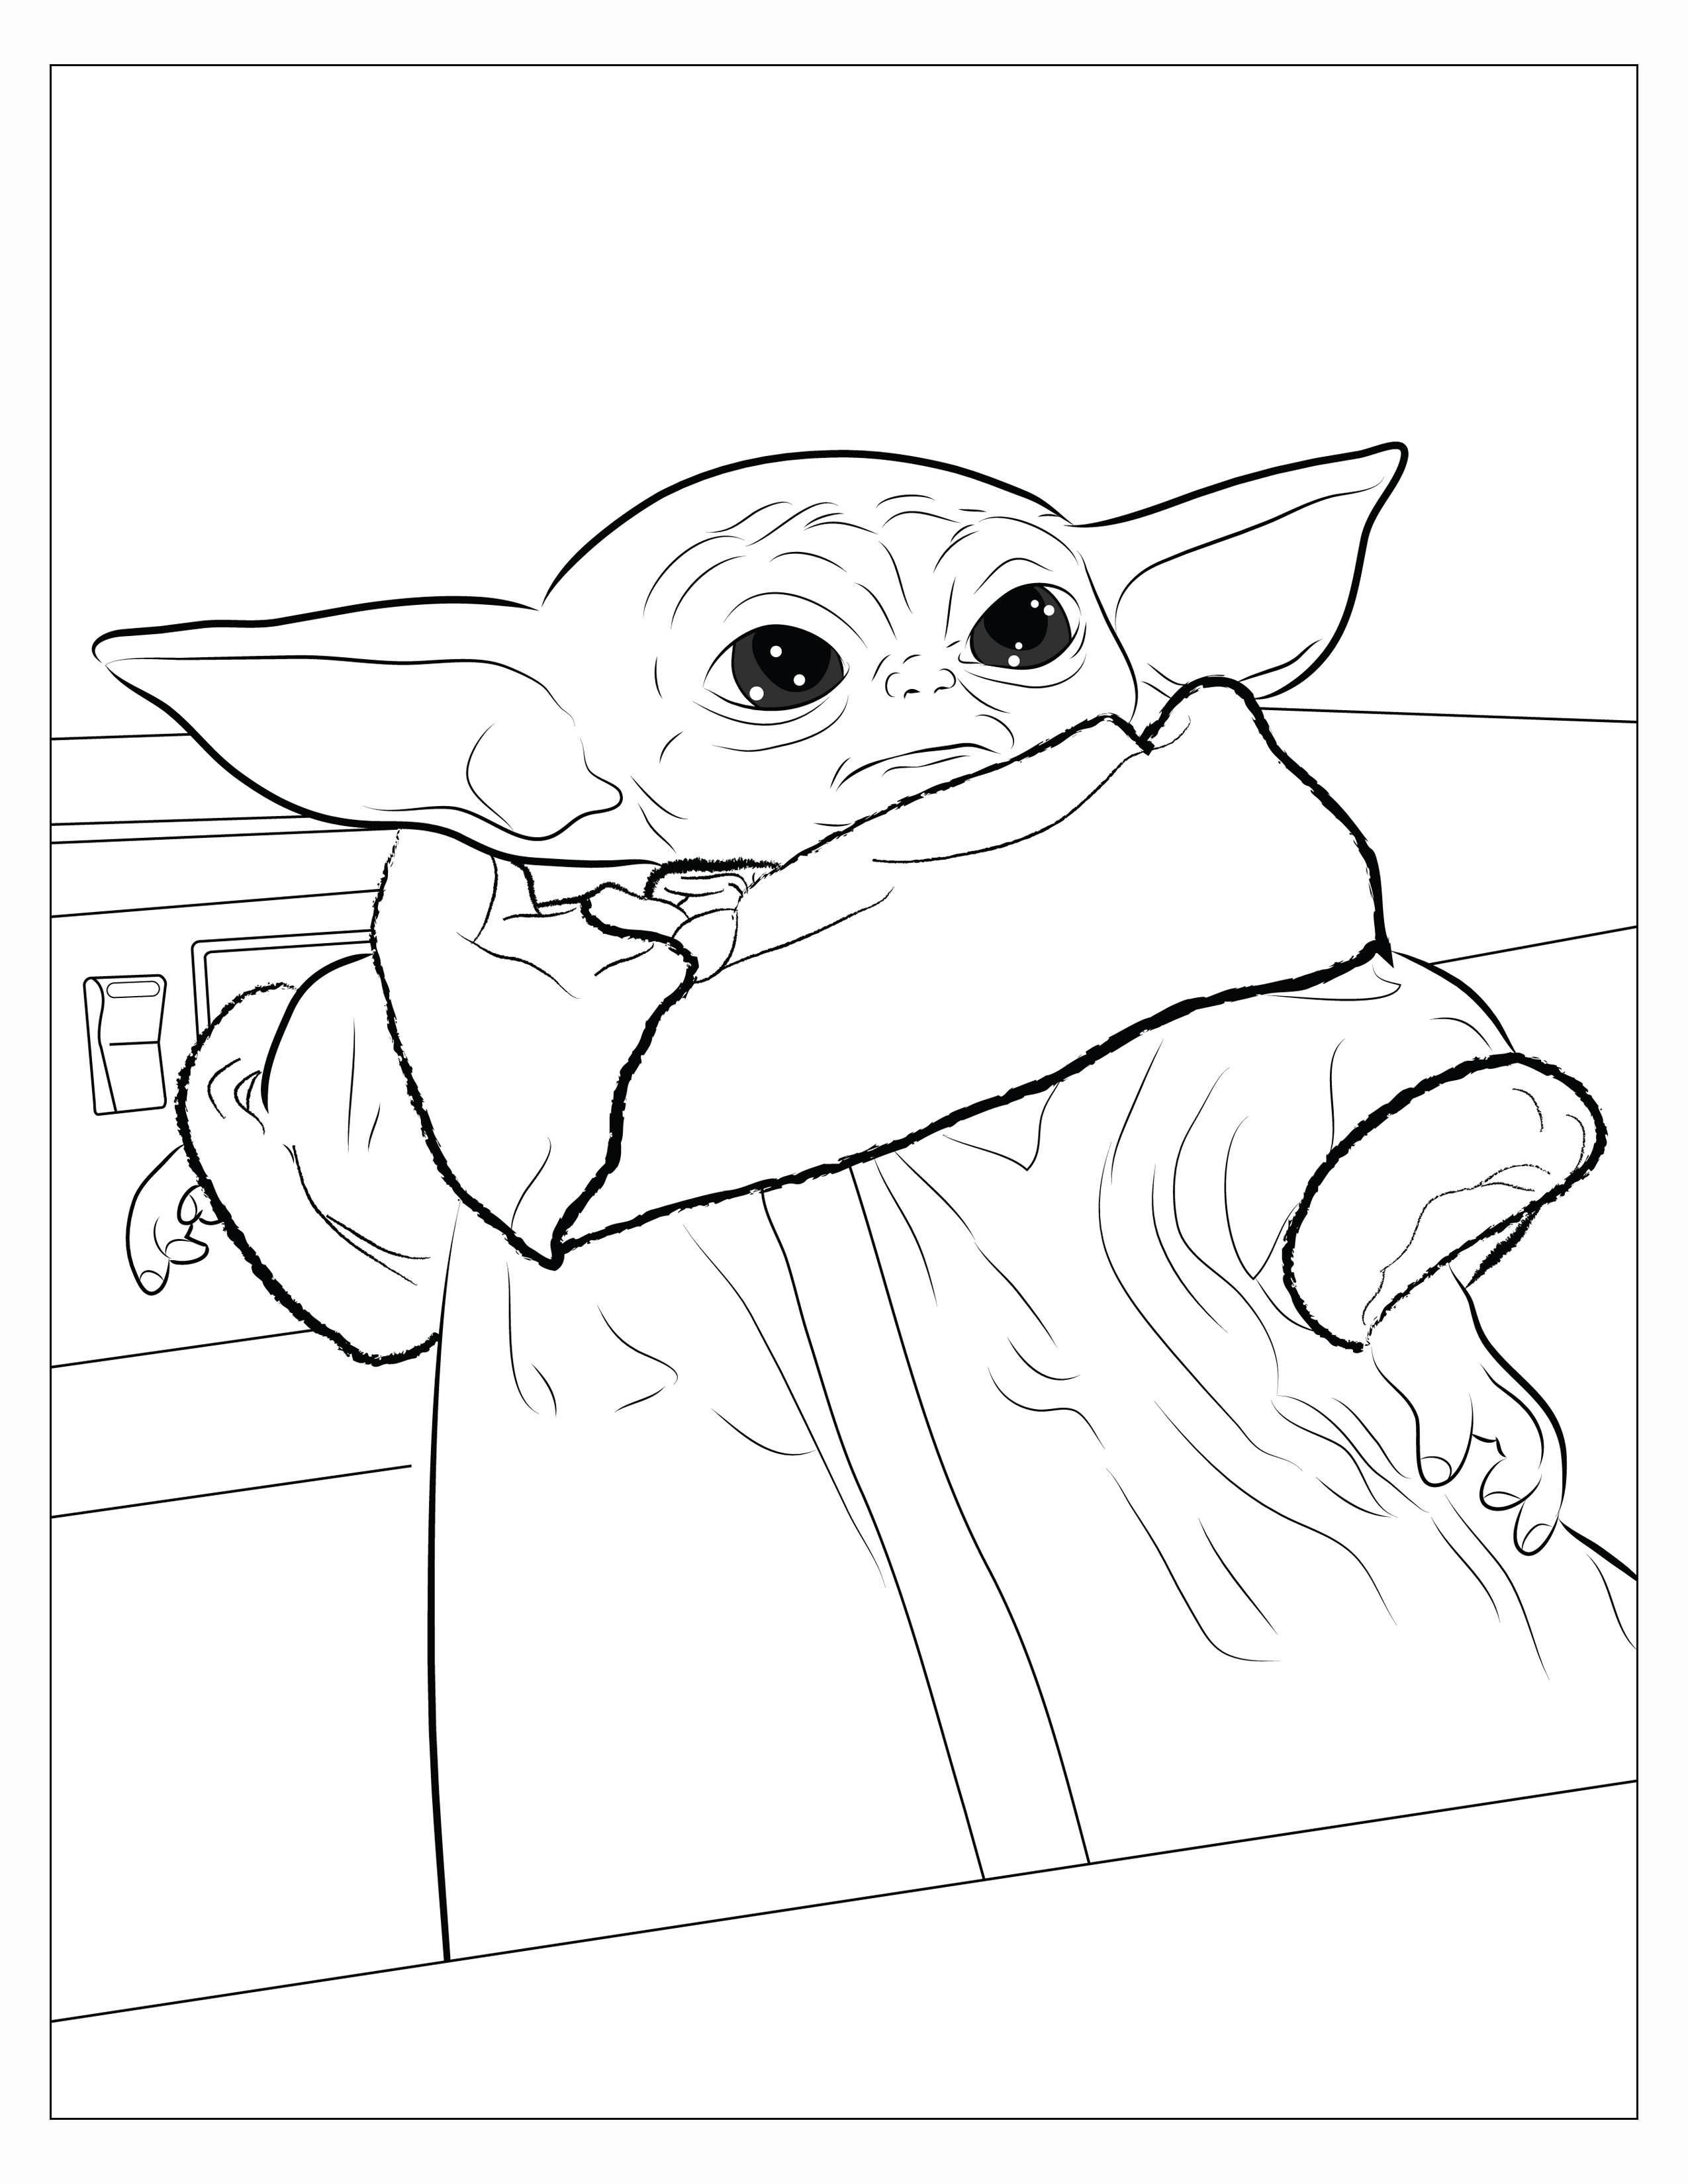 I made a coloring book for my niece and here are 8 pages you can download  and print | /r/BabyYoda | Baby Yoda / Grogu in 2021 | Coloring books, Coloring  book pages, Lego coloring pages